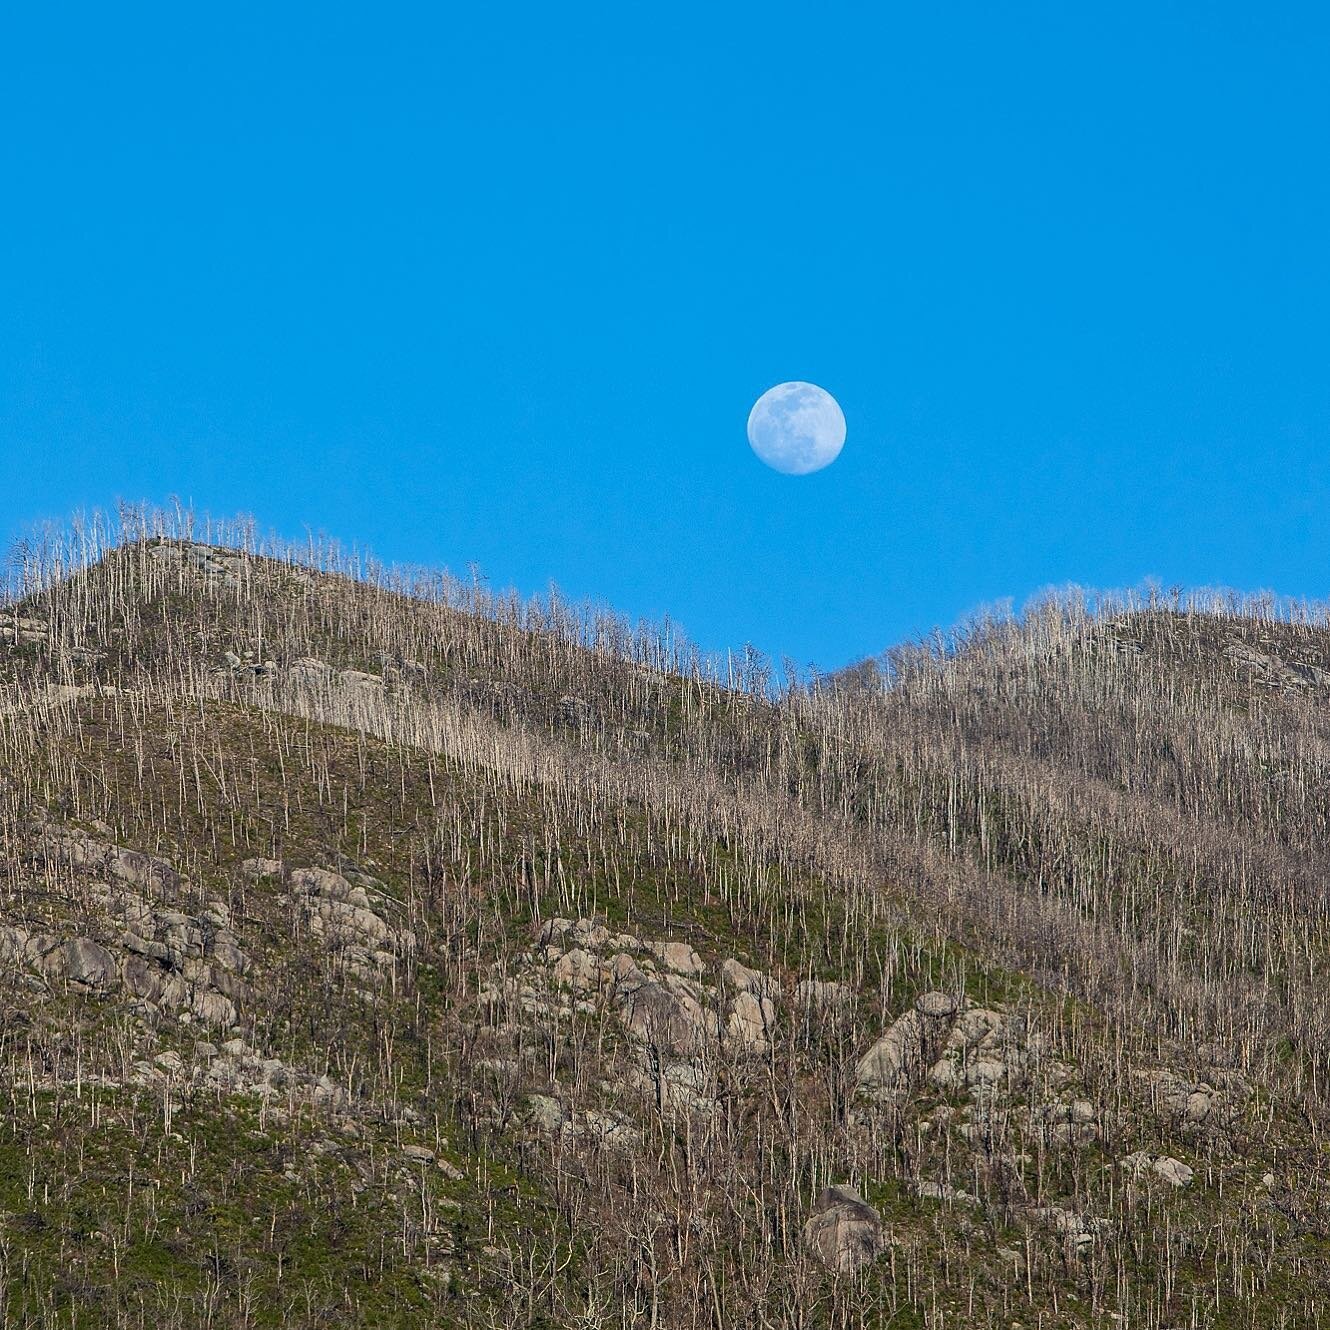 The effects of the wildfires in Smoky Mountains National Park.⁠⁠
⁠⁠
#smokymountains #nationalpark #wildfire #moonrise